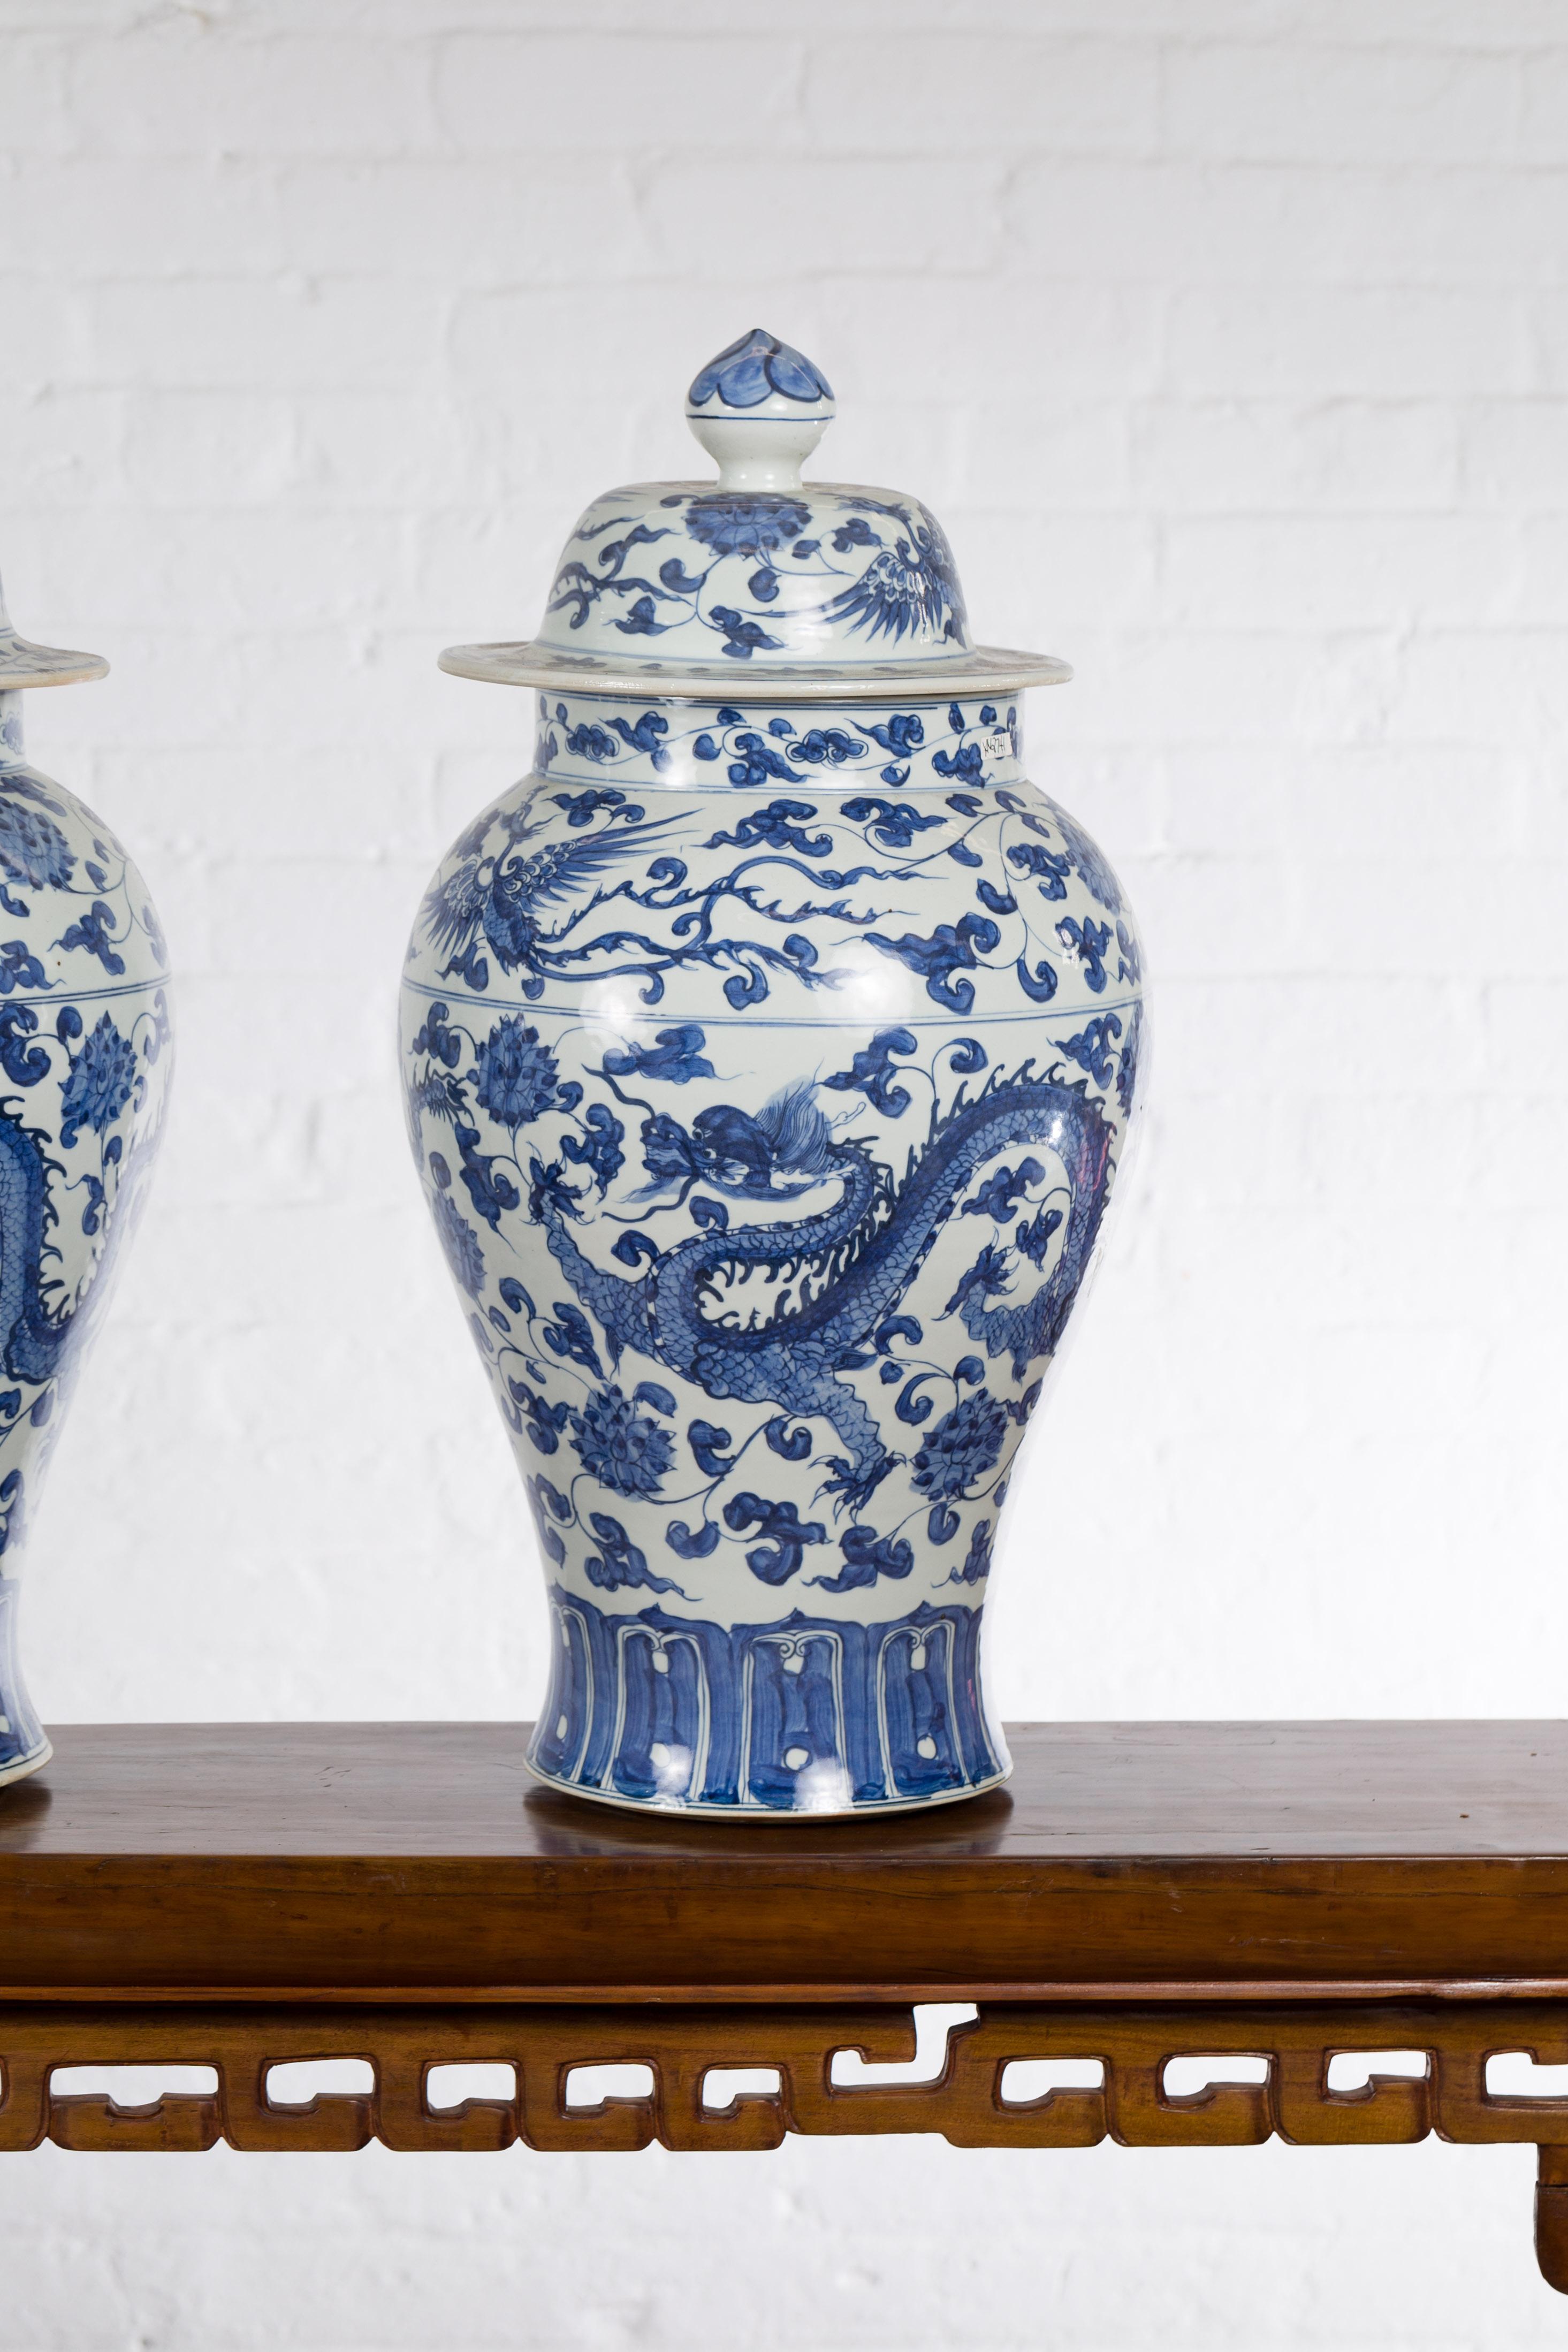 Pair of Vintage Chinese Blue and white Porcelain Lidded Jars with Dragon Motifs 16